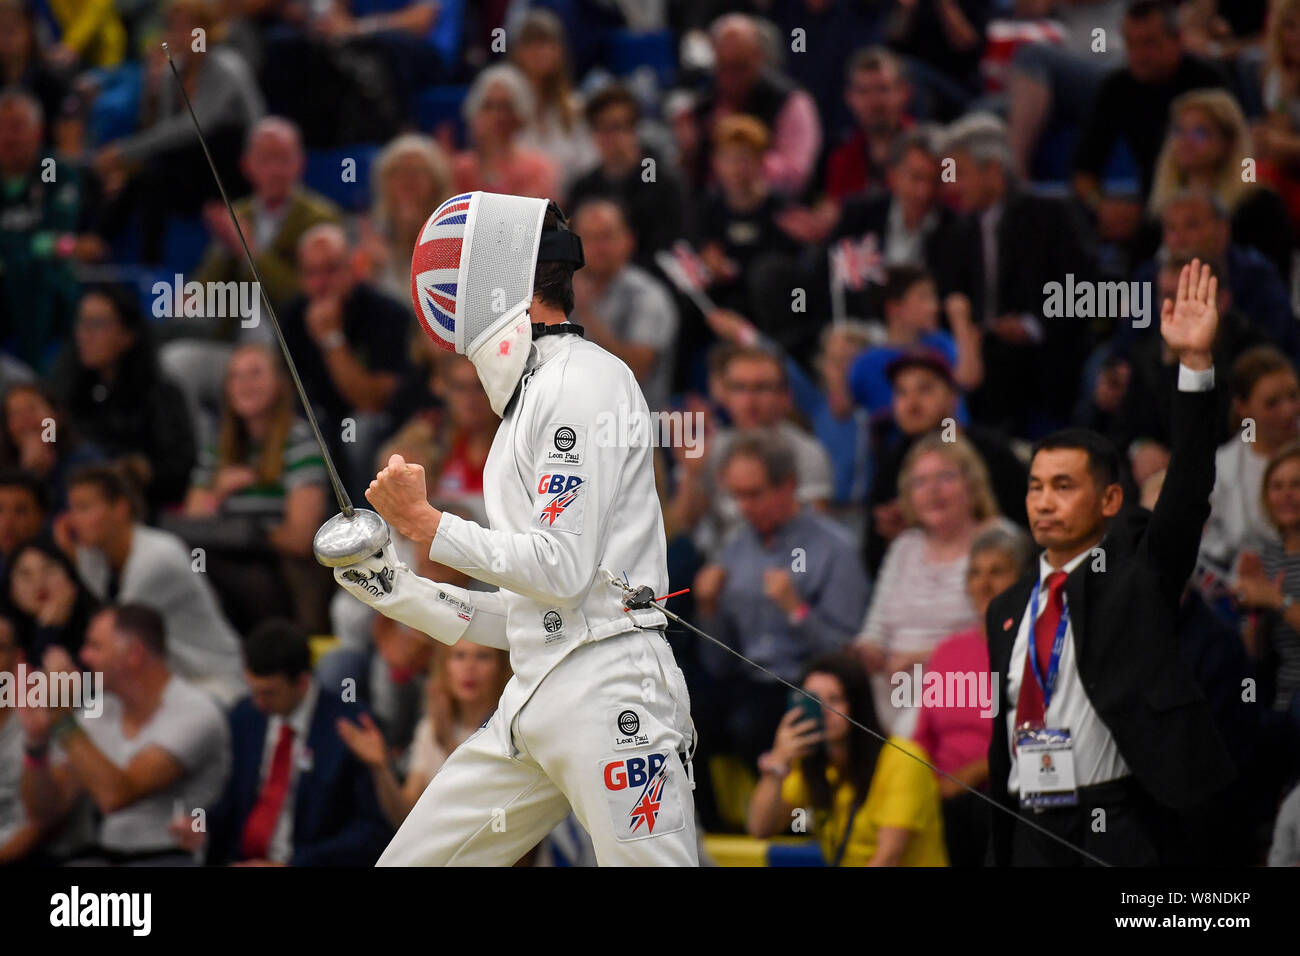 James Cooke of Great Britain celebrates during the fencing on day five of the 2019 European Modern Pentathlon Championships at the University of Bath. Stock Photo